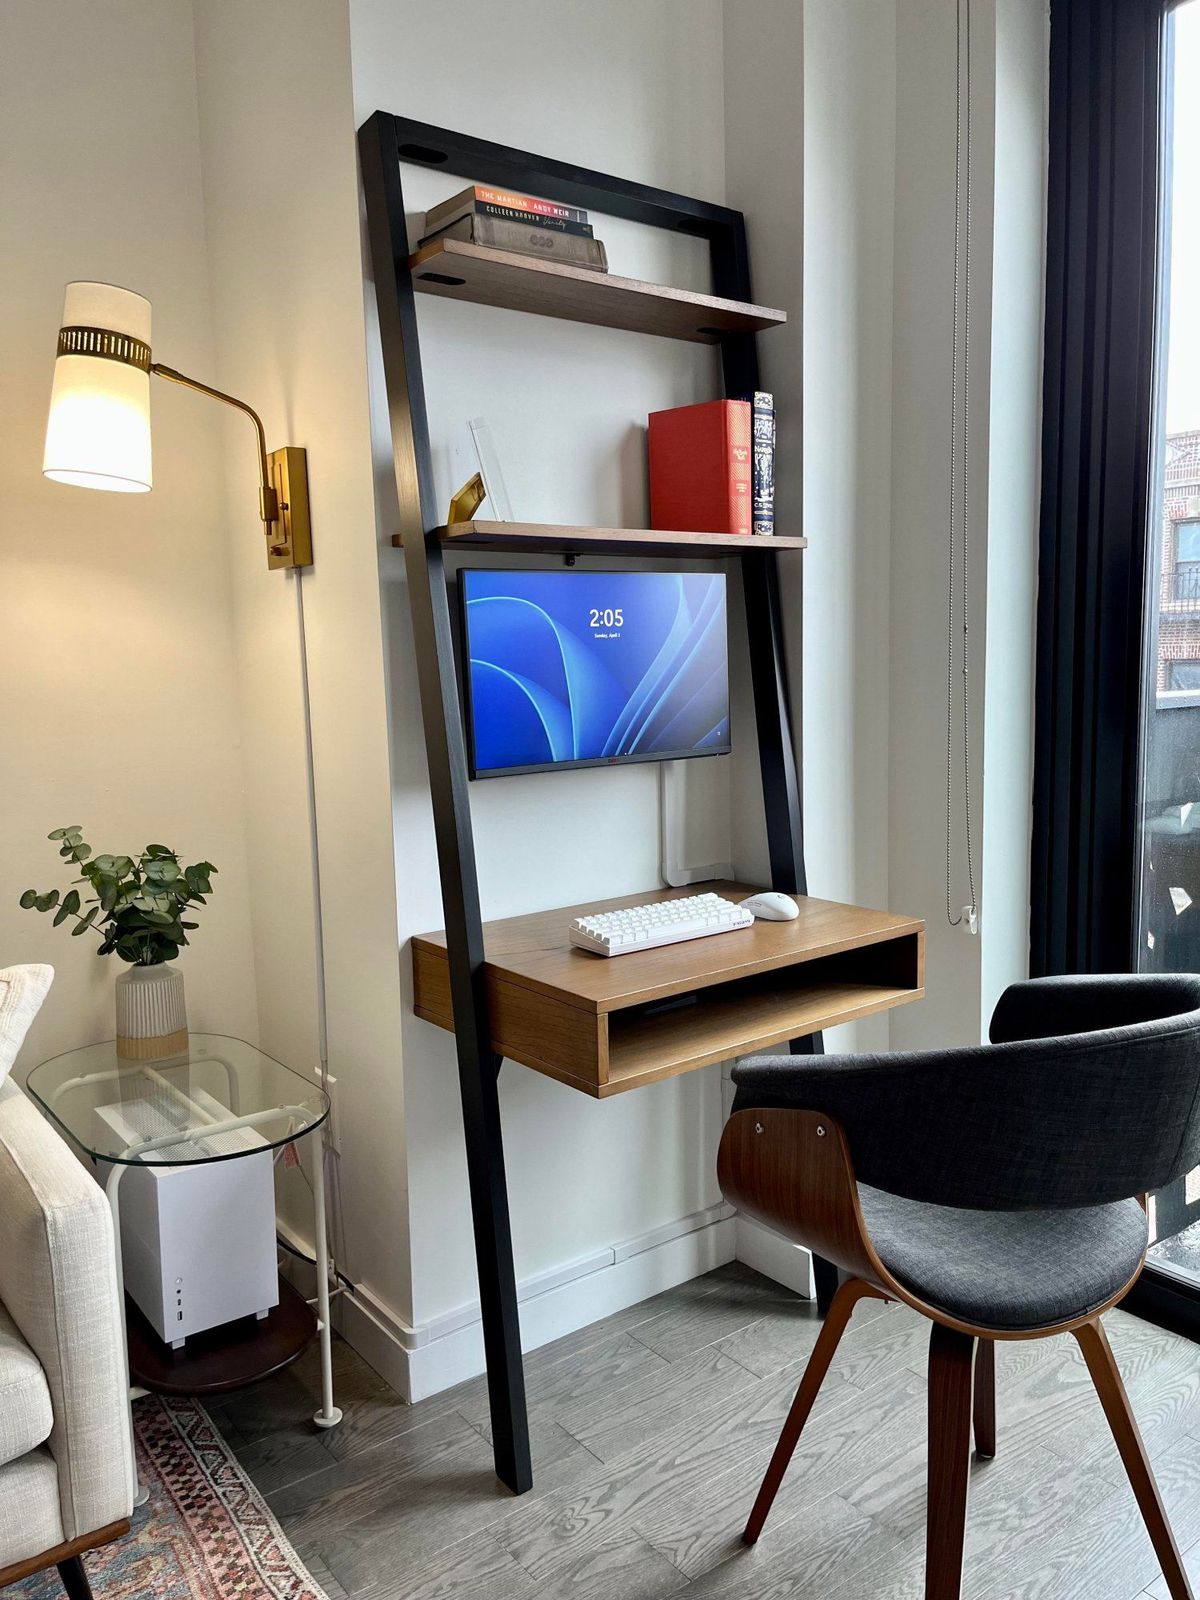 Standing Desk for Working from Home in a Small Space - The Inspired Room